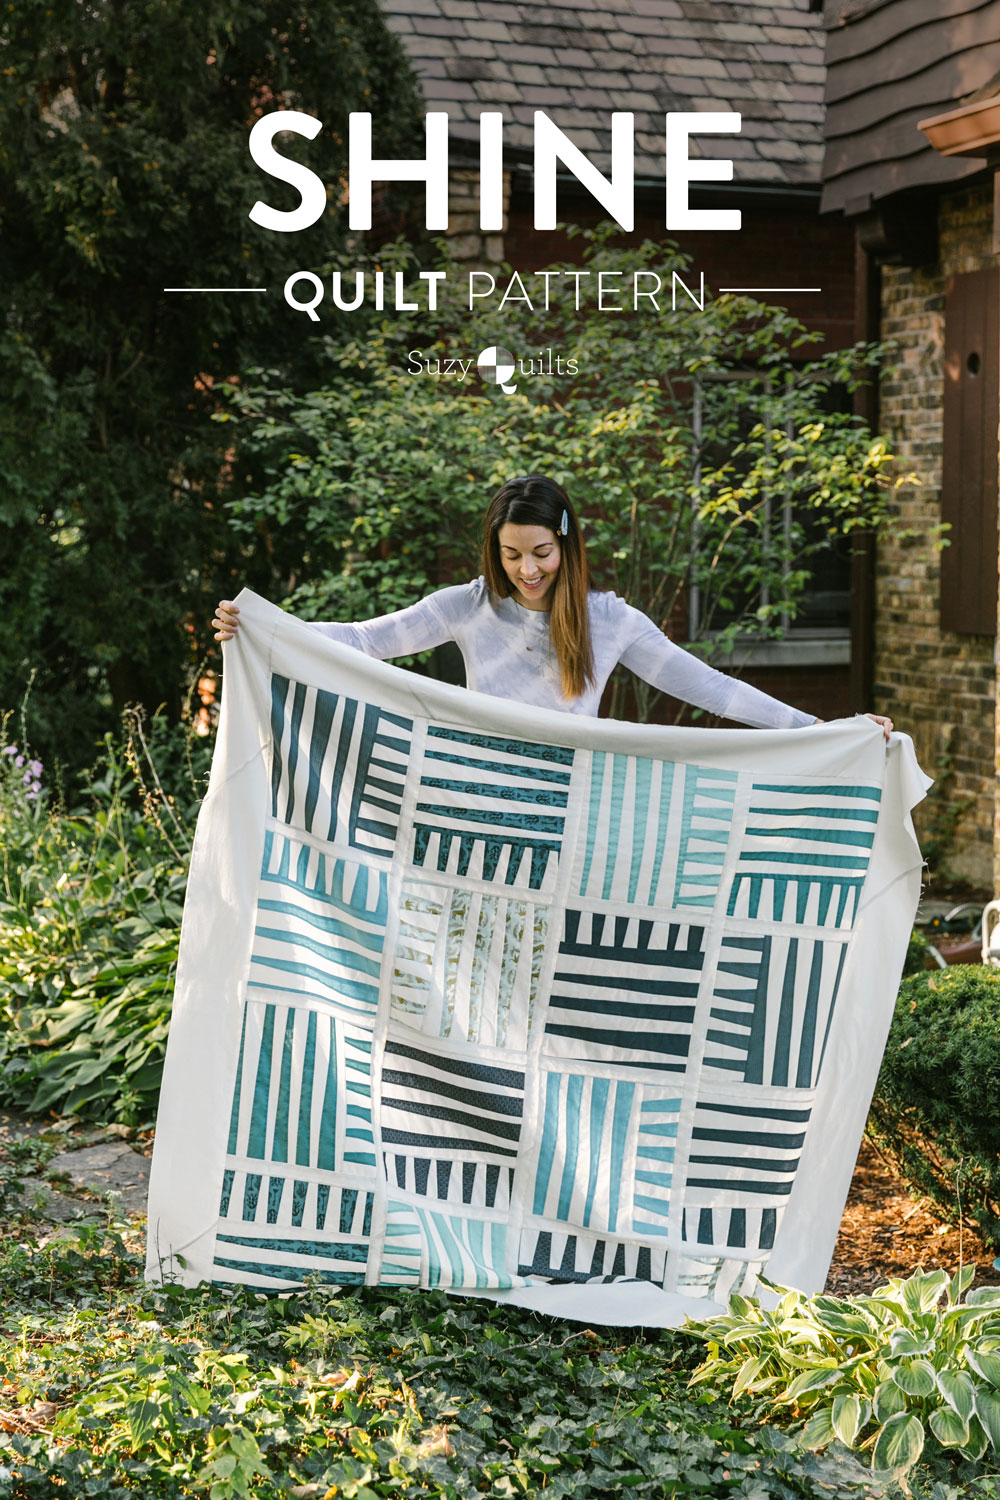 The Shine quilt along is a 7-week online community sewing event focused on making the throw Shine quilt pattern. In week 1 we pick fabric. suzyquilts.com #qal #quiltpattern